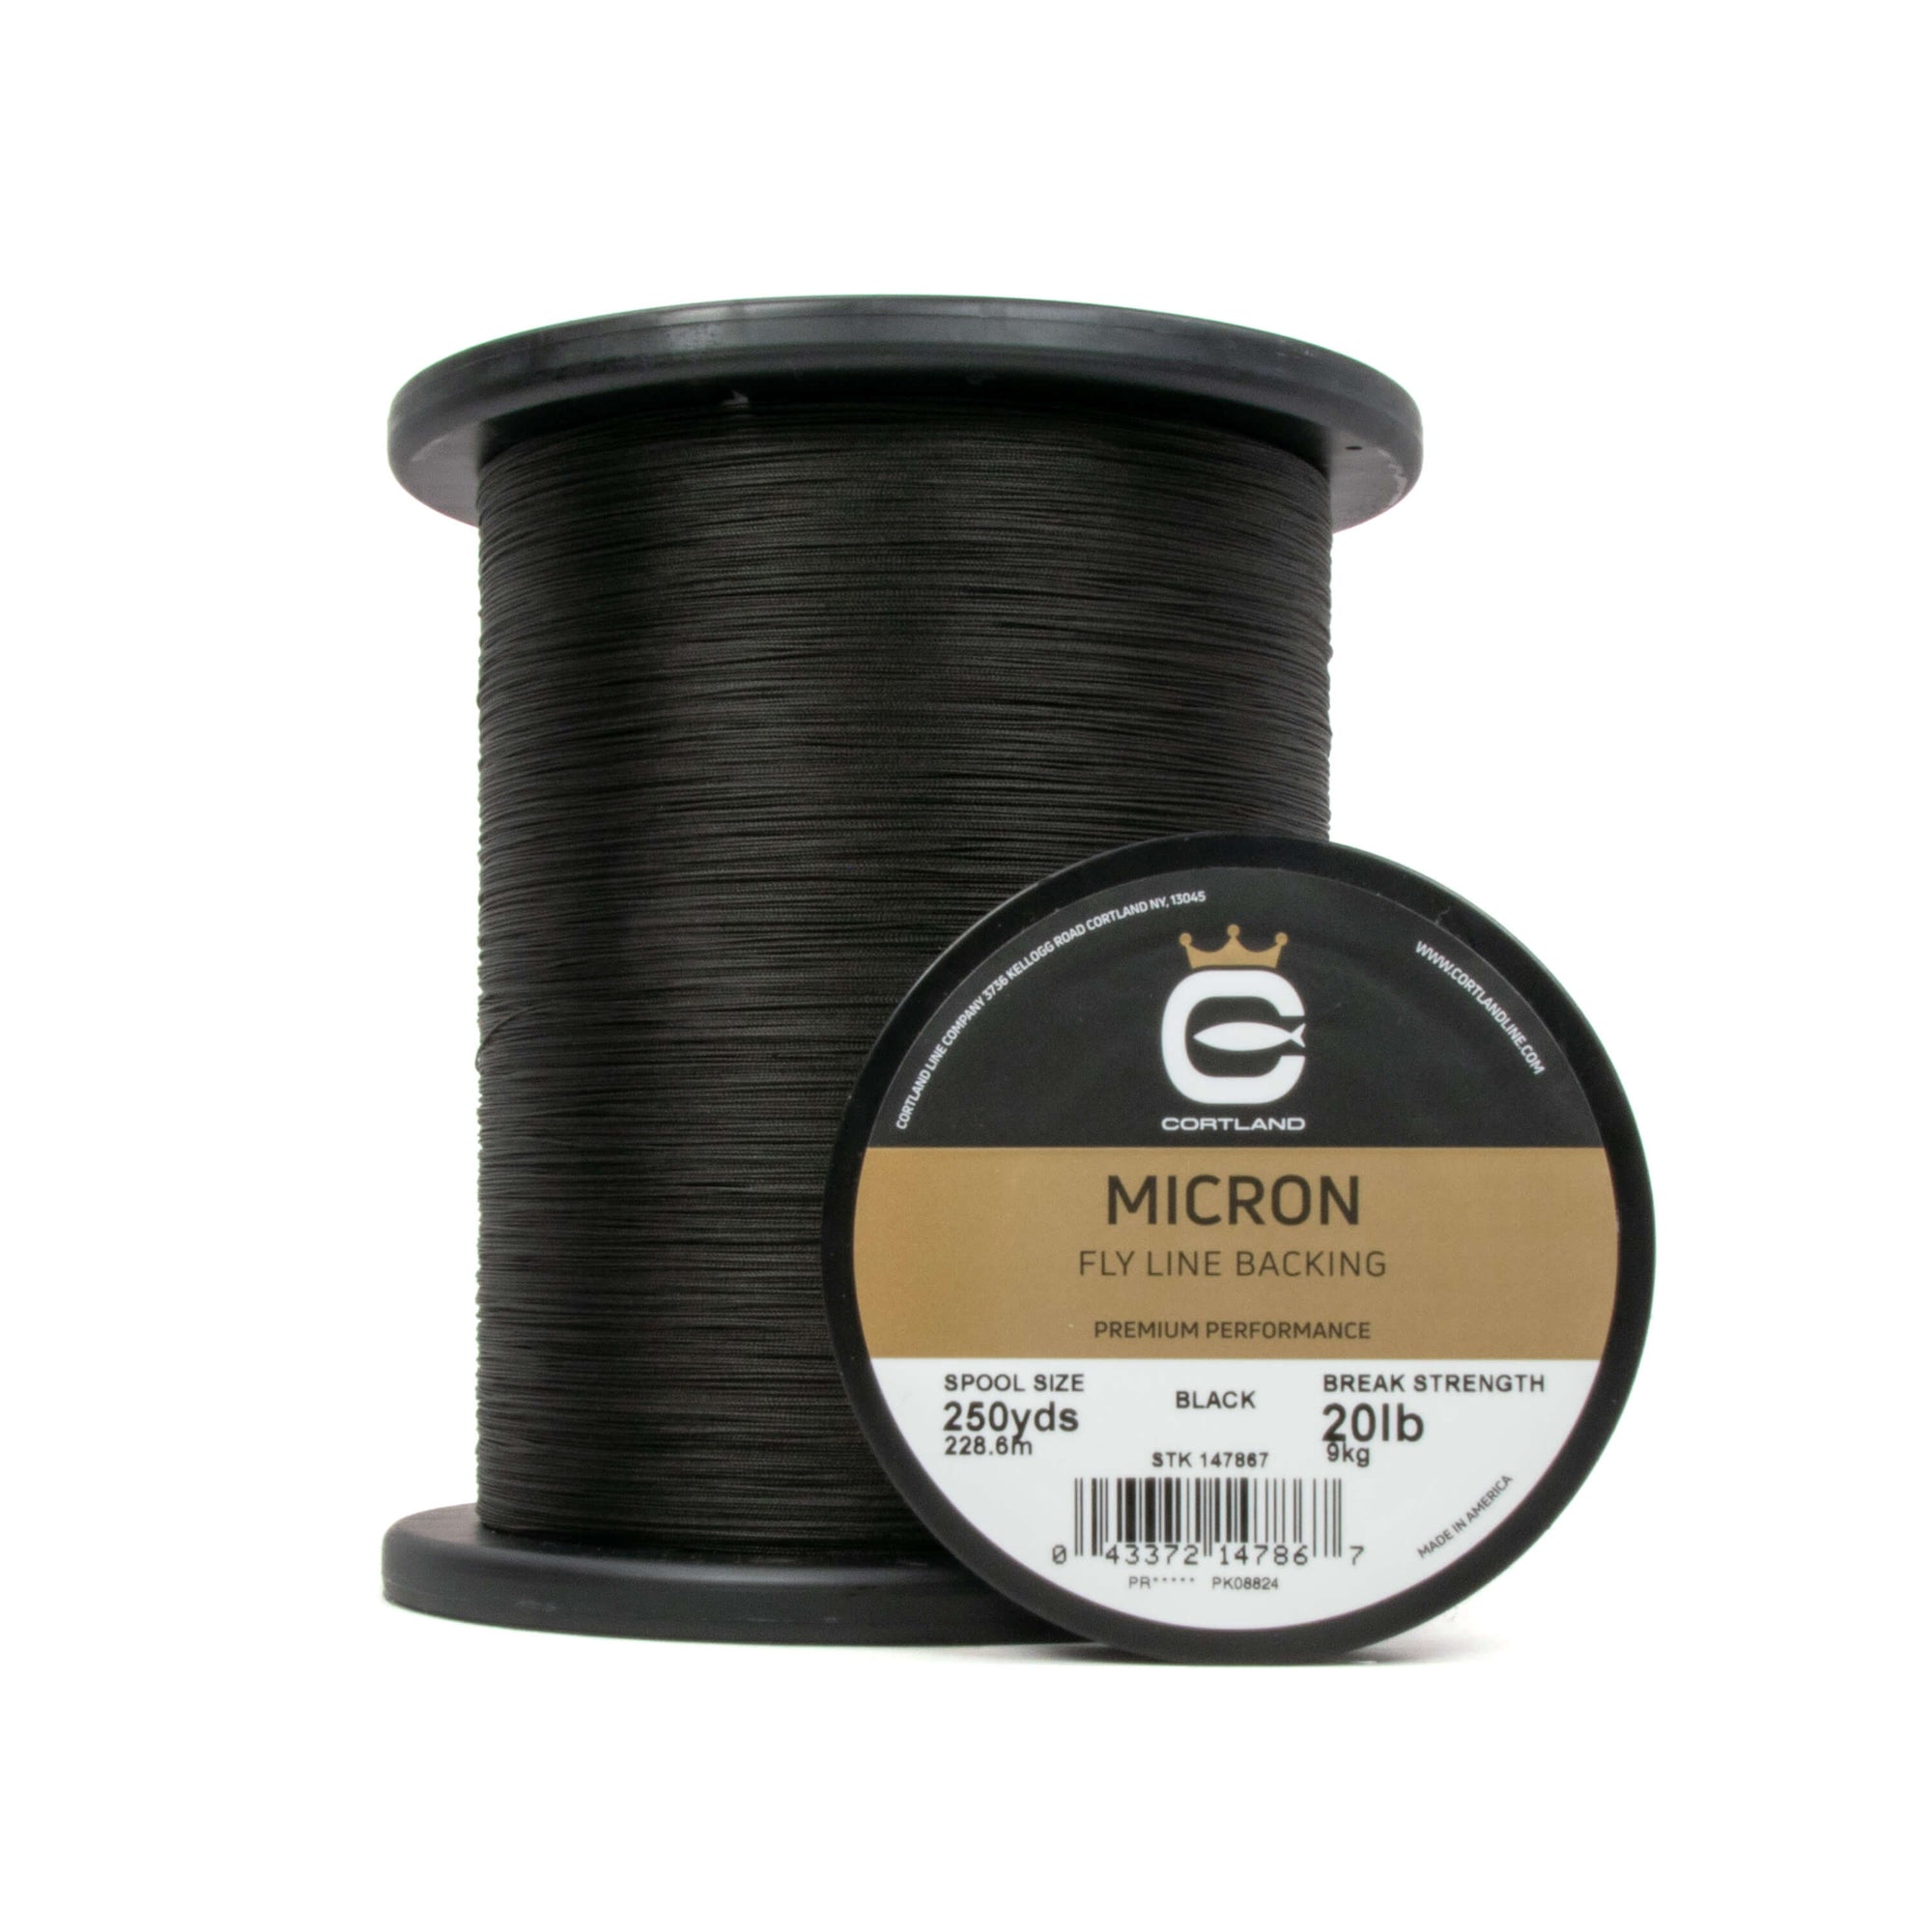 Various spool sizes of Micron Fly Line Backing - Black